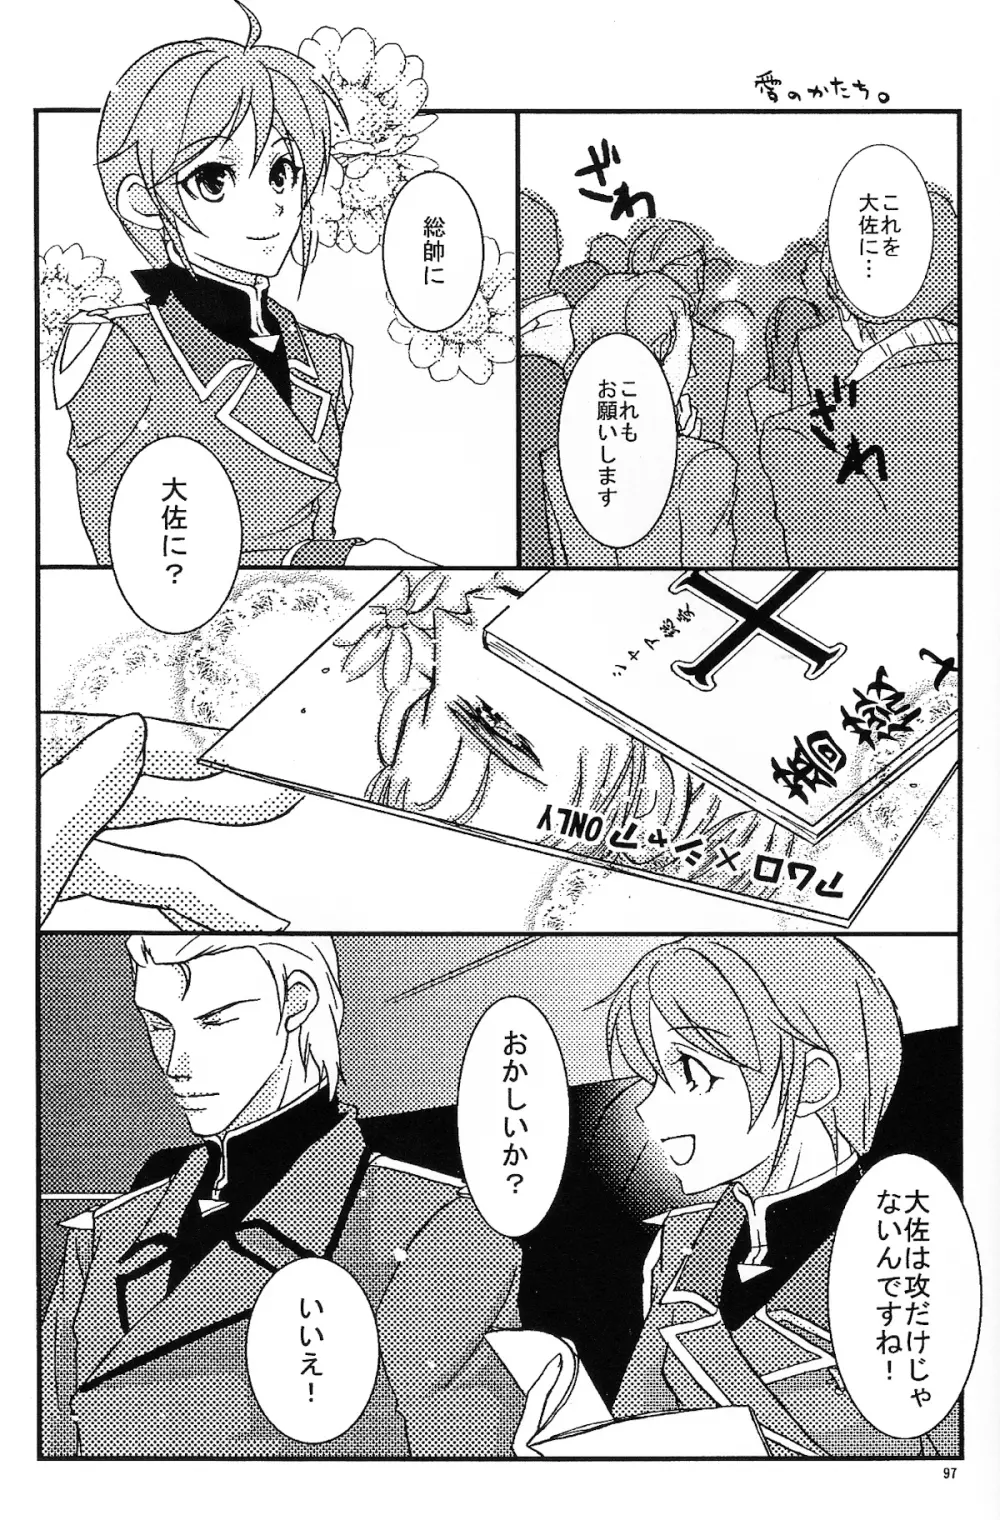 REPLAY 108 再録本 - page95